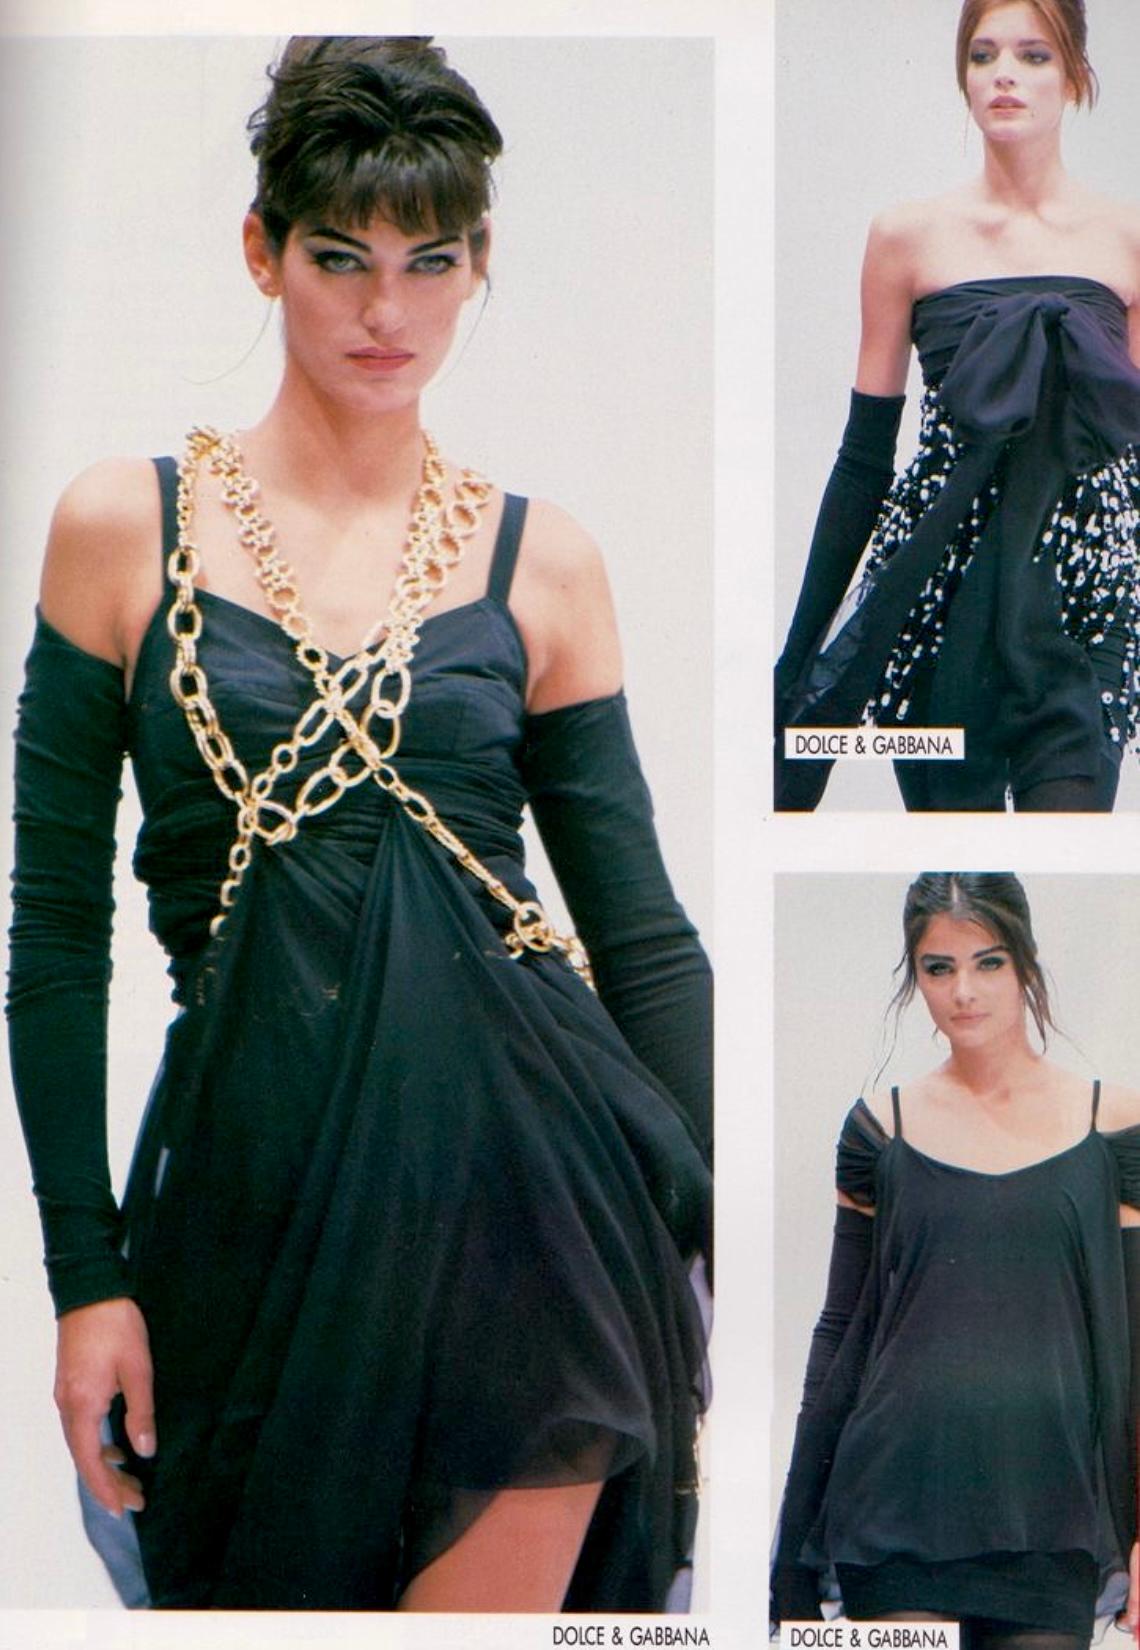 Presenting a fabulous black Dolce & Gabbana bodycon mini dress. From the Spring/Summer 1991 collection, this dress is adorned with gold-tone chain straps and a scoop neckline. Similar chain details debuted on the season's runway. This form-fitting